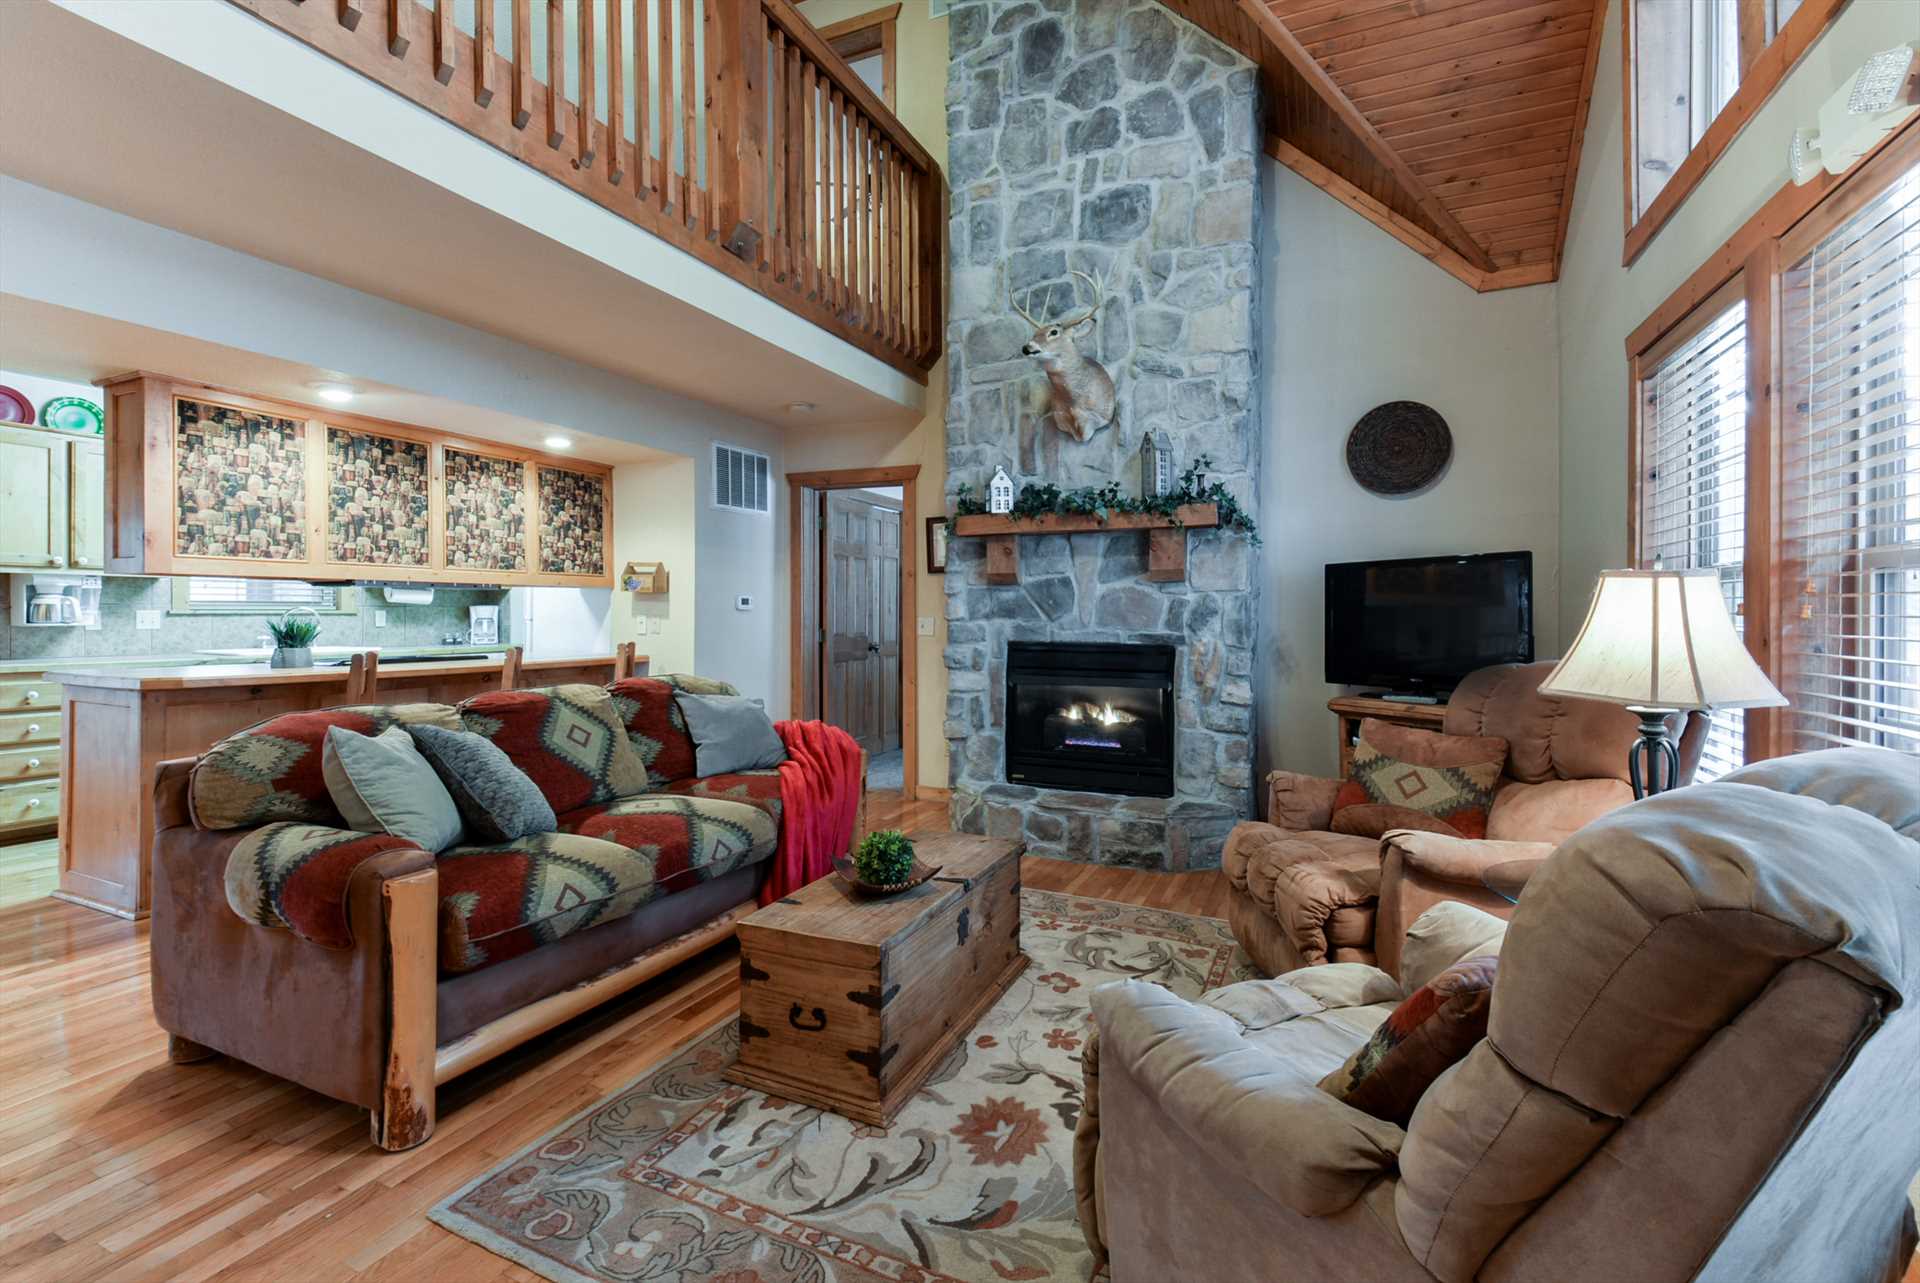 This 10 bedroom lodge is made up of two lodges, Lodge #20 a 